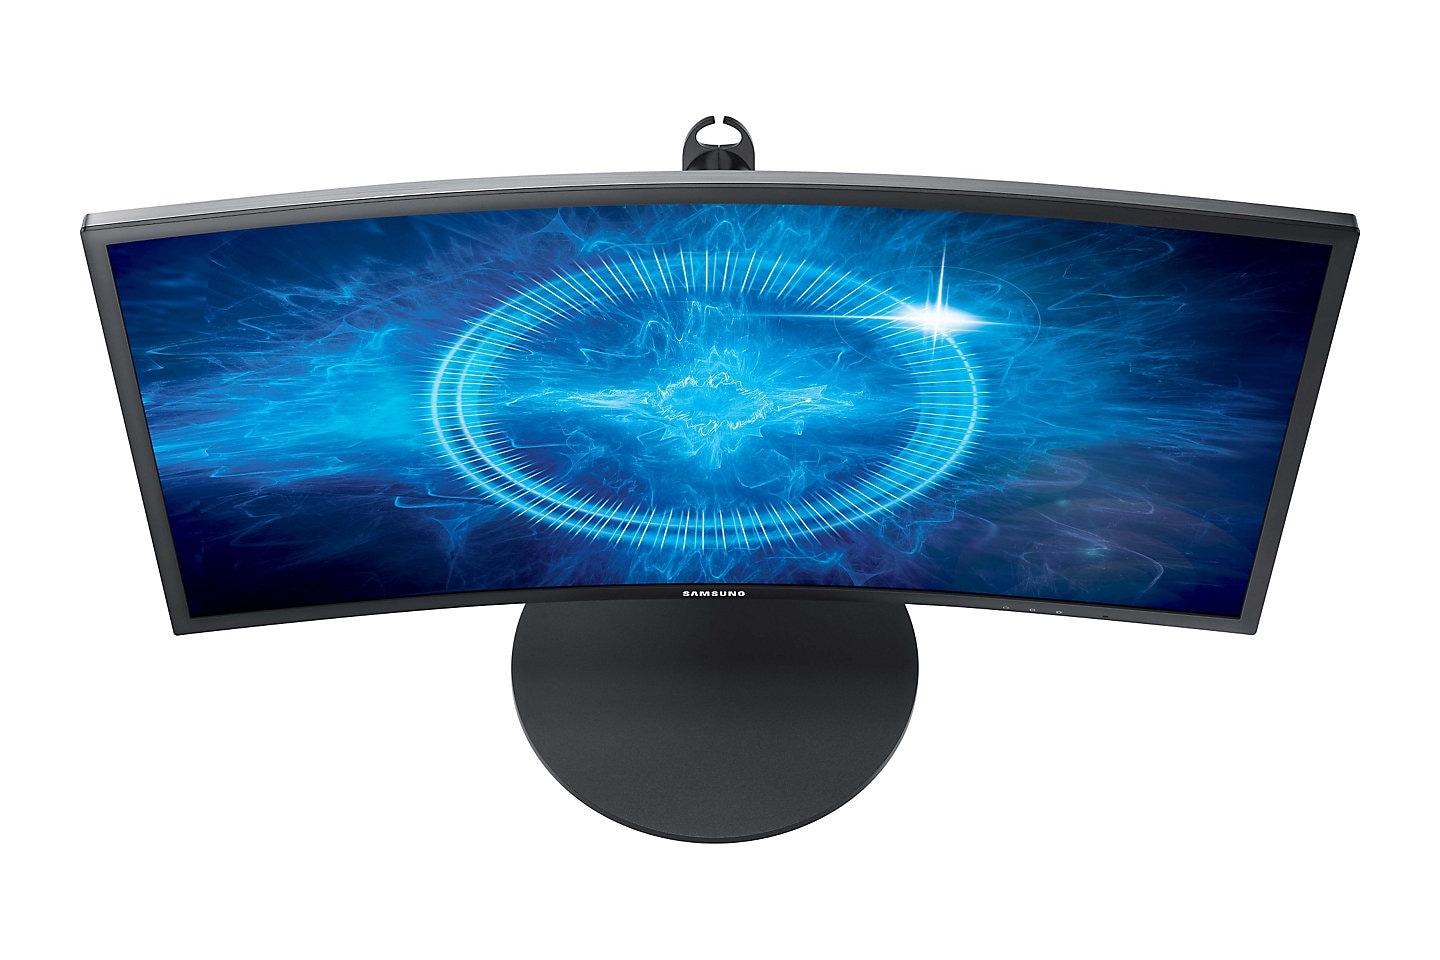 19 Screen curvature for an ultimate immersive experience